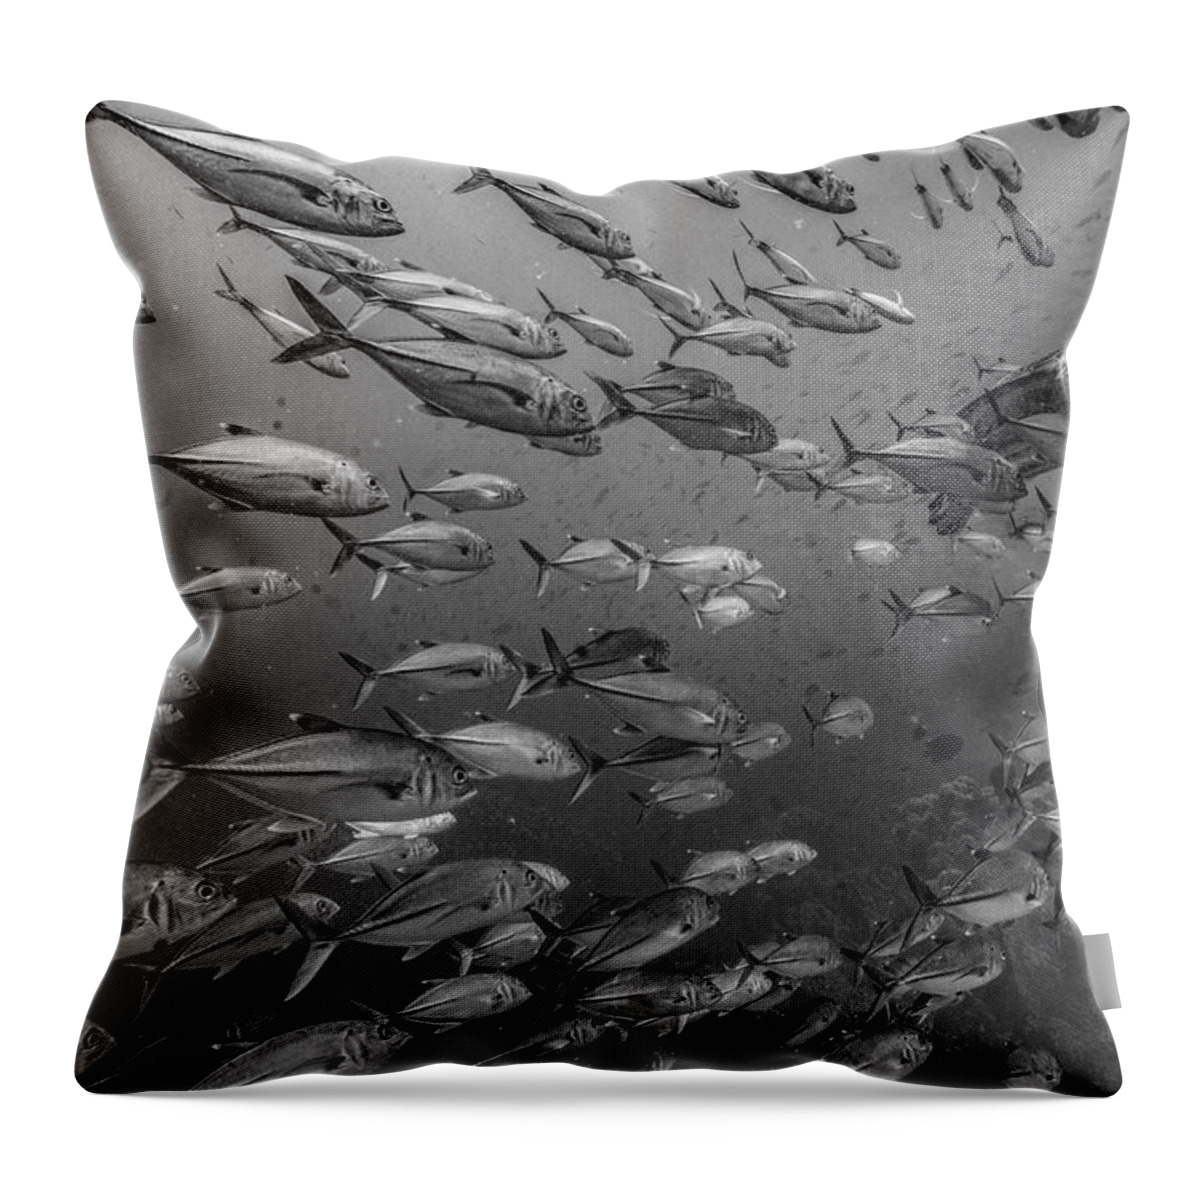 Disk1215 Throw Pillow featuring the photograph Sea Turtle And Schooling Fish #1 by Tim Fitzharris